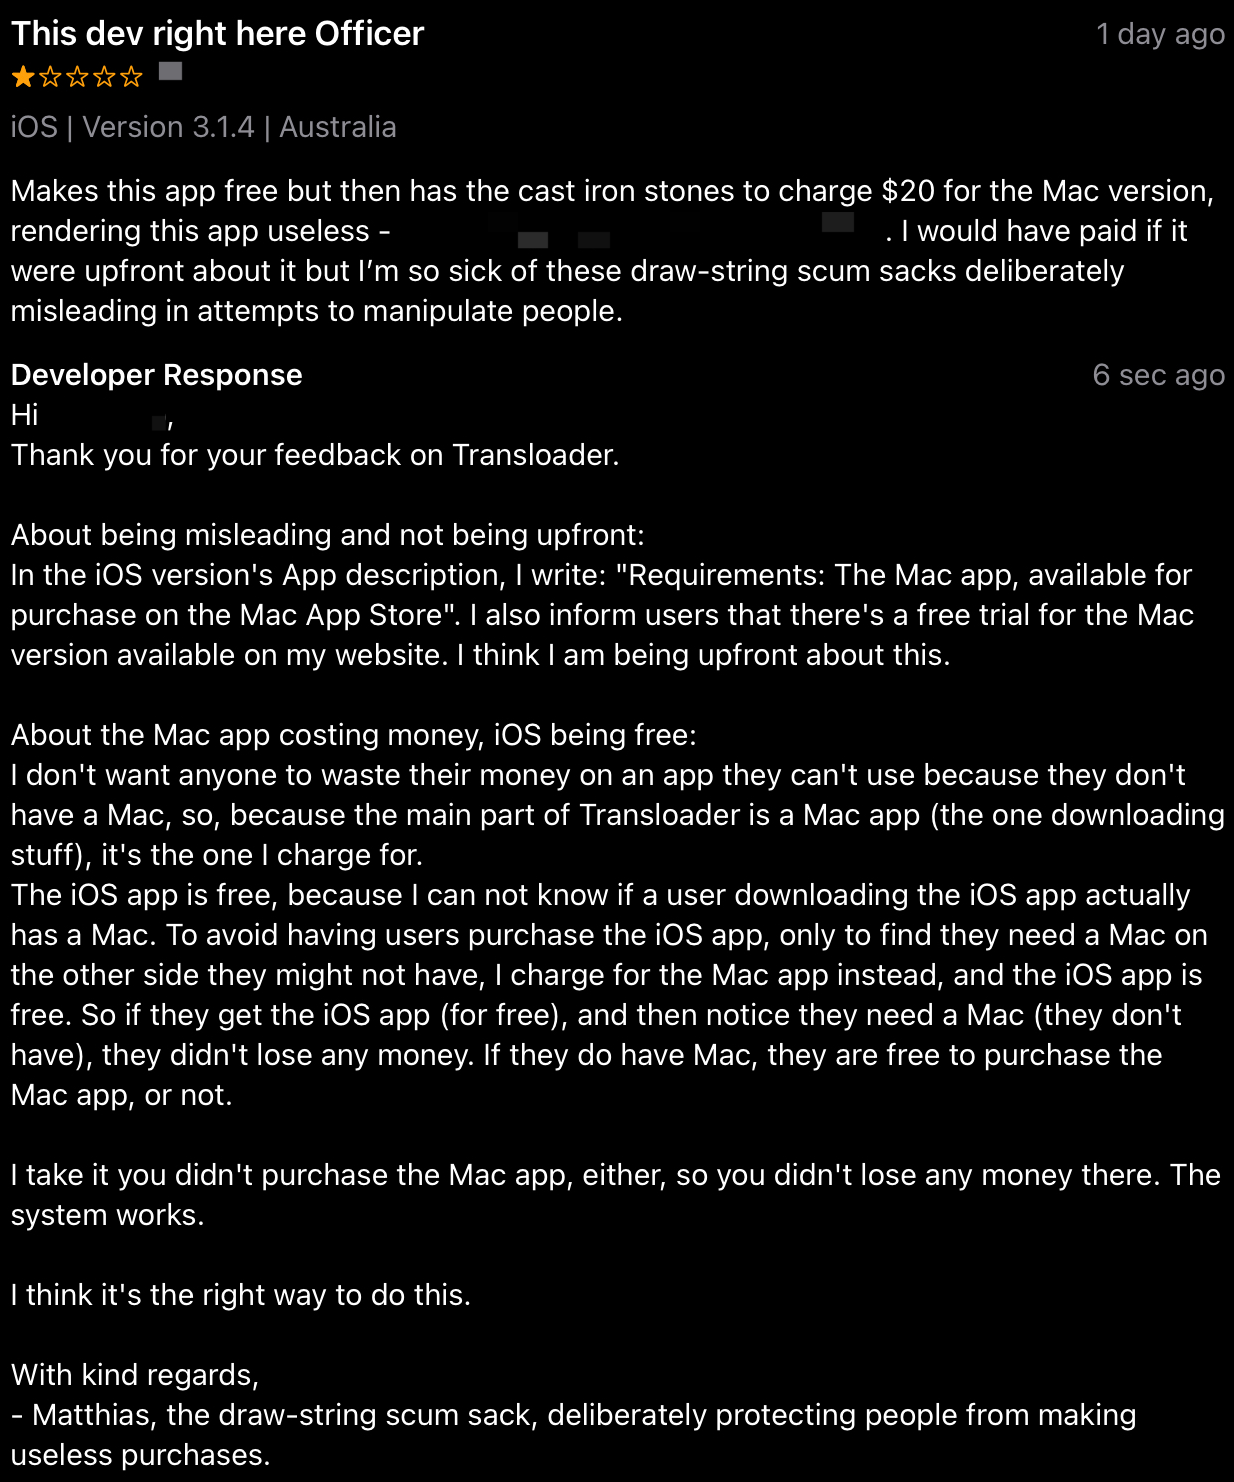 This dev right here Officer
by <redacted>
iOS | Version 3.1.4 | Australia
Makes this app free but then has the cast iron stones to charge $20 for the Mac version,
rendering this app useless - <redacted>. I would have paid if it
were upfront about it but I'm so sick of these draw-string scum sacks deliberately
misleading in attempts to manipulate people.

Developer Response
Hi <redacted>,
Thank you for your feedback on Transloader.
About being misleading and not being upfront:
In the iOS version's App description, I write: "Requirements: The Mac app, available for
purchase on the Mac App Store". I also inform users that there's a free trial for the Mac
version available on my website. I think I am being upfront about this.
About the Mac app costing money, iOS being free:
don't want anyone to waste their money on an app they can't use because they don't
have a Mac, so, because the main part of Transloader is a Mac app (the one downloading
stuff), it's the one charge for.
The iOS app is free, because l can not know if a user downloading the iOS app actually
has a Mac. To avoid having users purchase the iOS app, only to find they need a Mac on
the other side they might not have, I charge for the Mac app instead, and the iOS app is
free. So if they get the iOS app (for free), and then notice they need a Mac (they don't
have), they didn't lose any money. If they do have Mac, they are free to purchase the
Mac
app,
or not.
I take it you didn't purchase the Mac app, either, so you didn't lose any money there. The
system works.
I think it's the right way to do this.
With kind regards,
Matthias, the draw-string scum sack, deliberately protecting people from making
useless purchases.